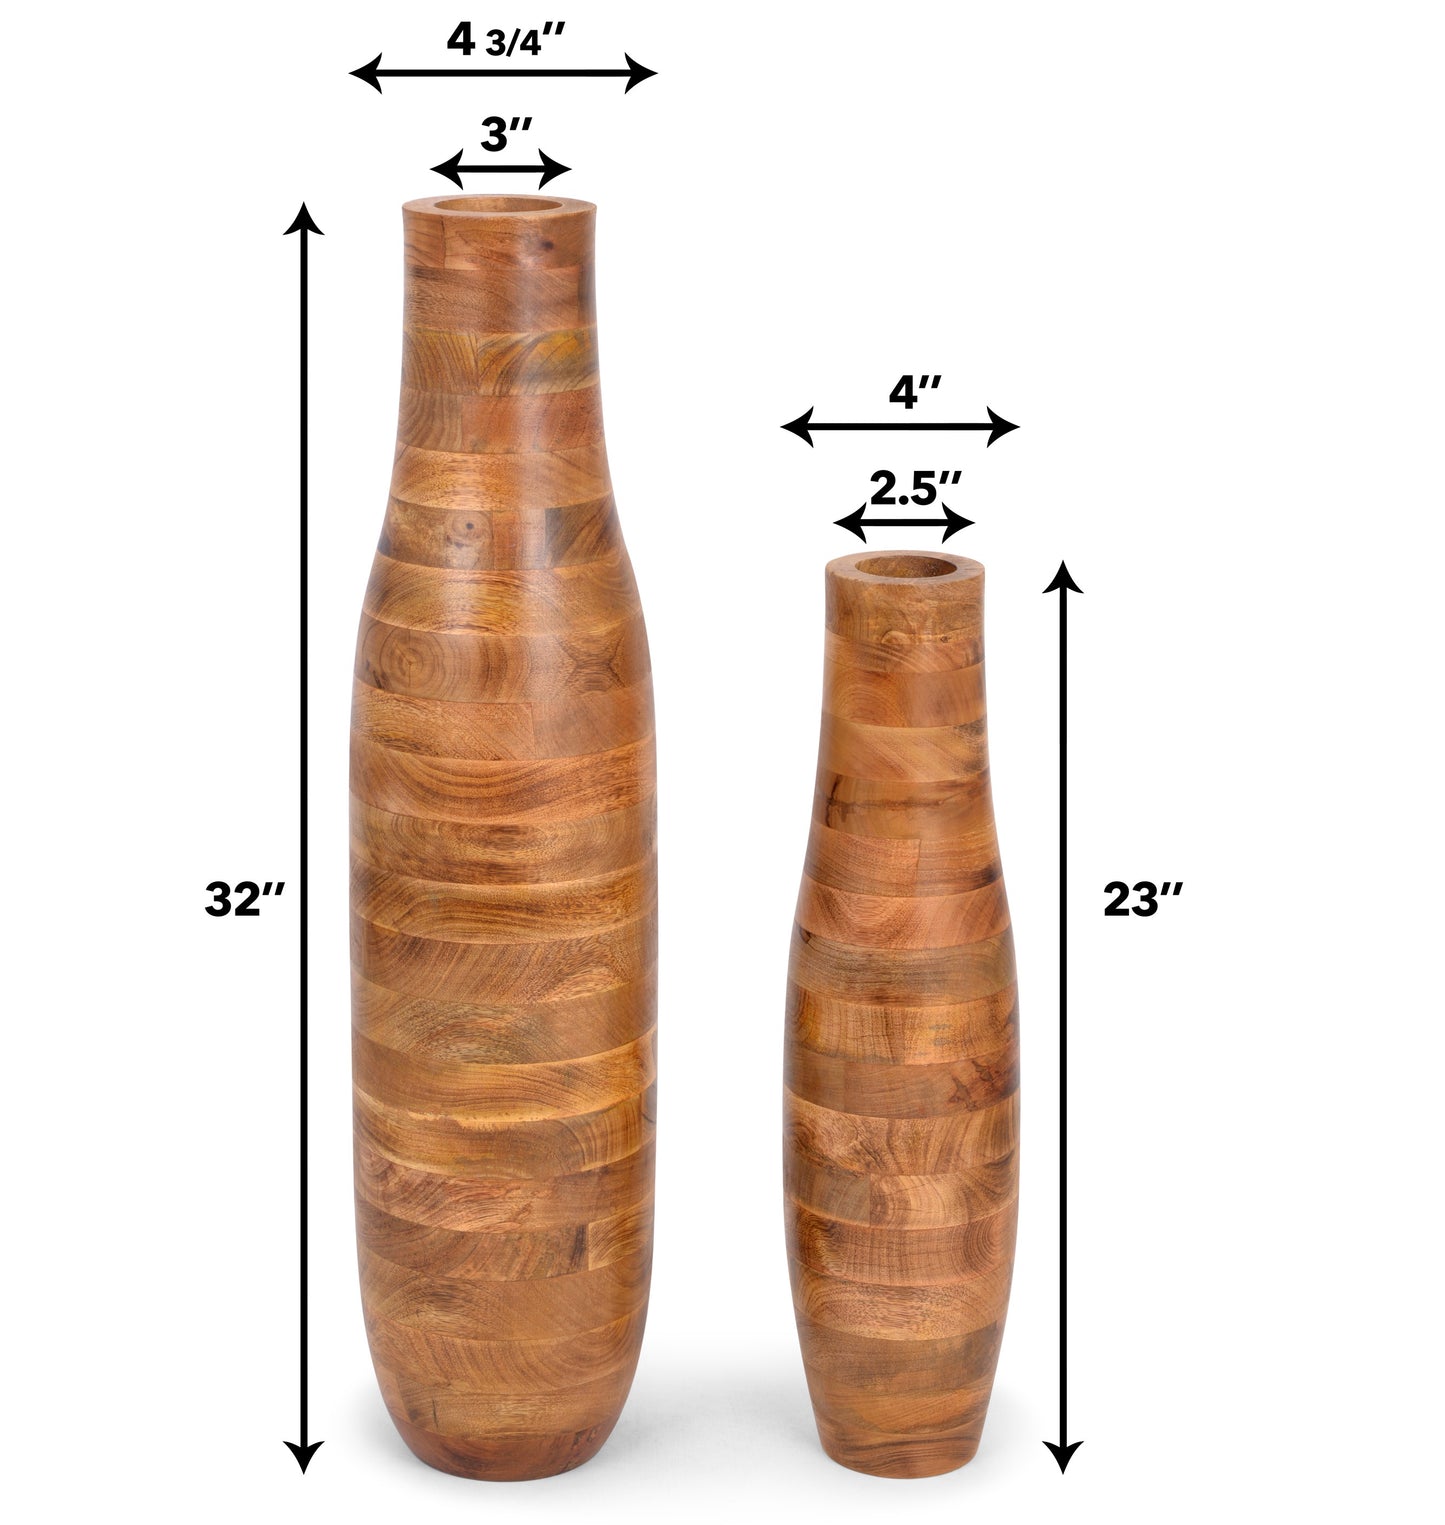 Tall Floor Vase - Extra Large Wooden Vase for Pampas Grass Decor 32"